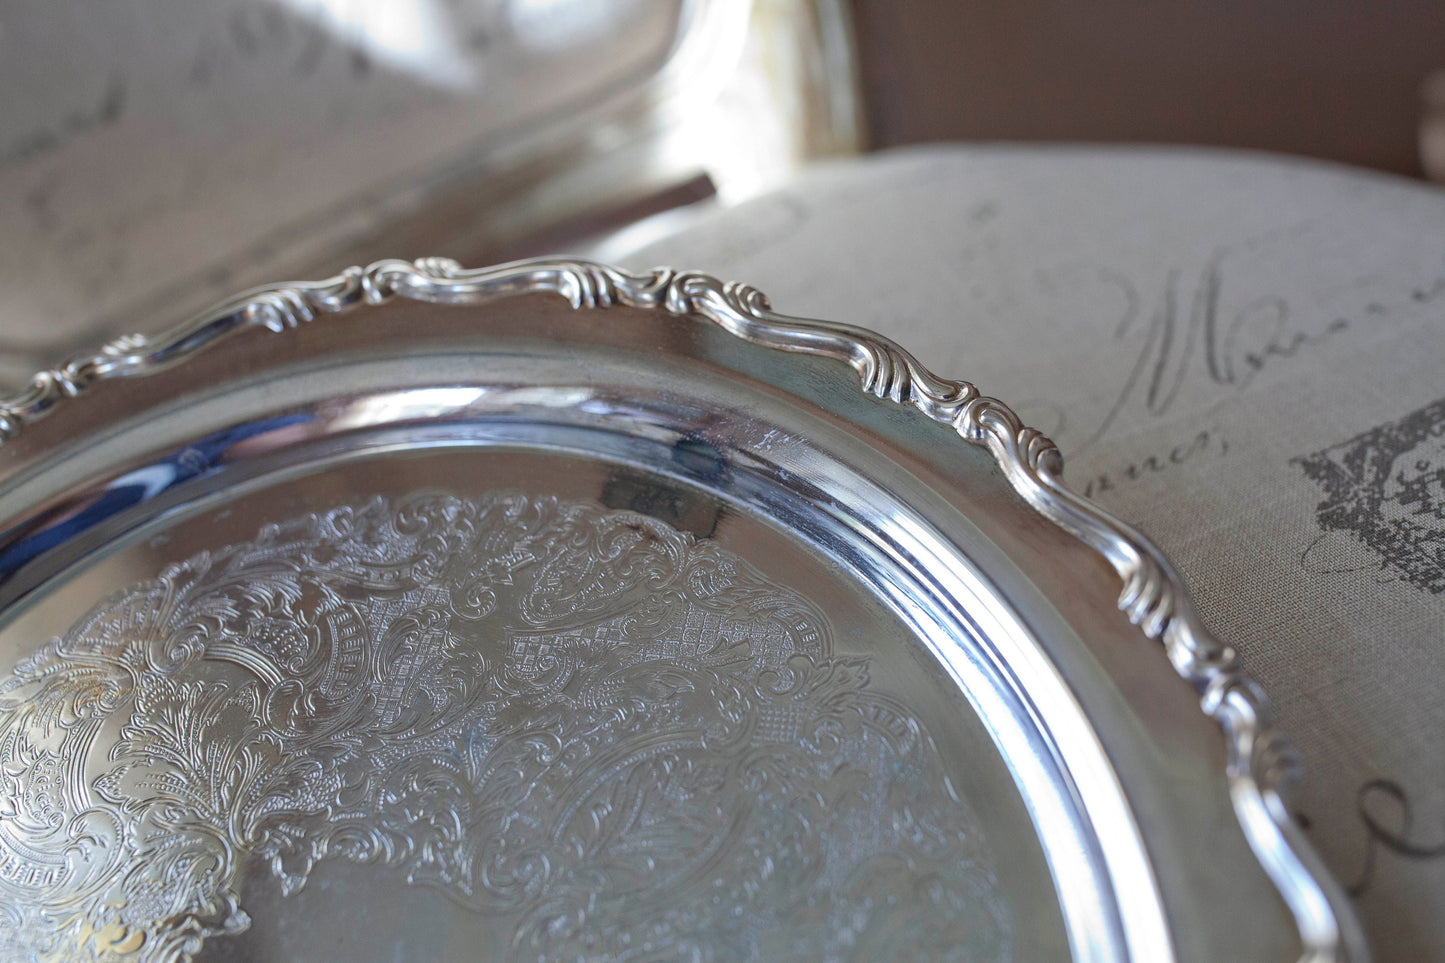 Vintage Silver Plate and Glass Serving Tray by Oneida with Glass Insert with Five Divides , 1970s Oneida